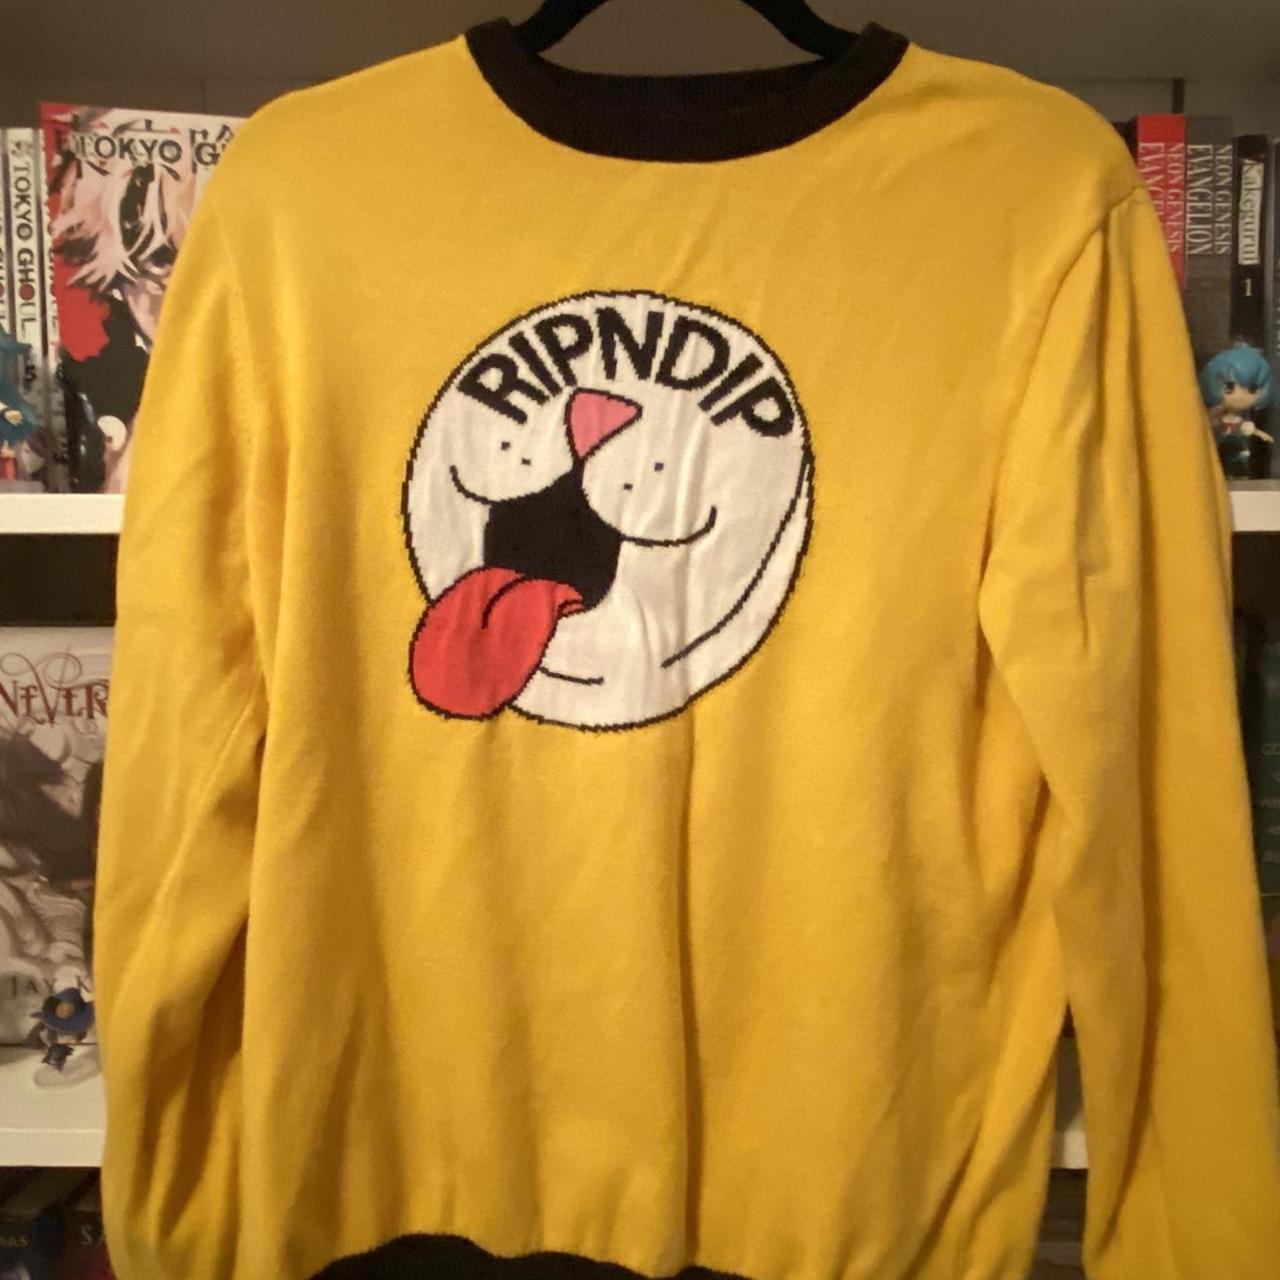 RipNDip Sweater, Used item good condition, Size...